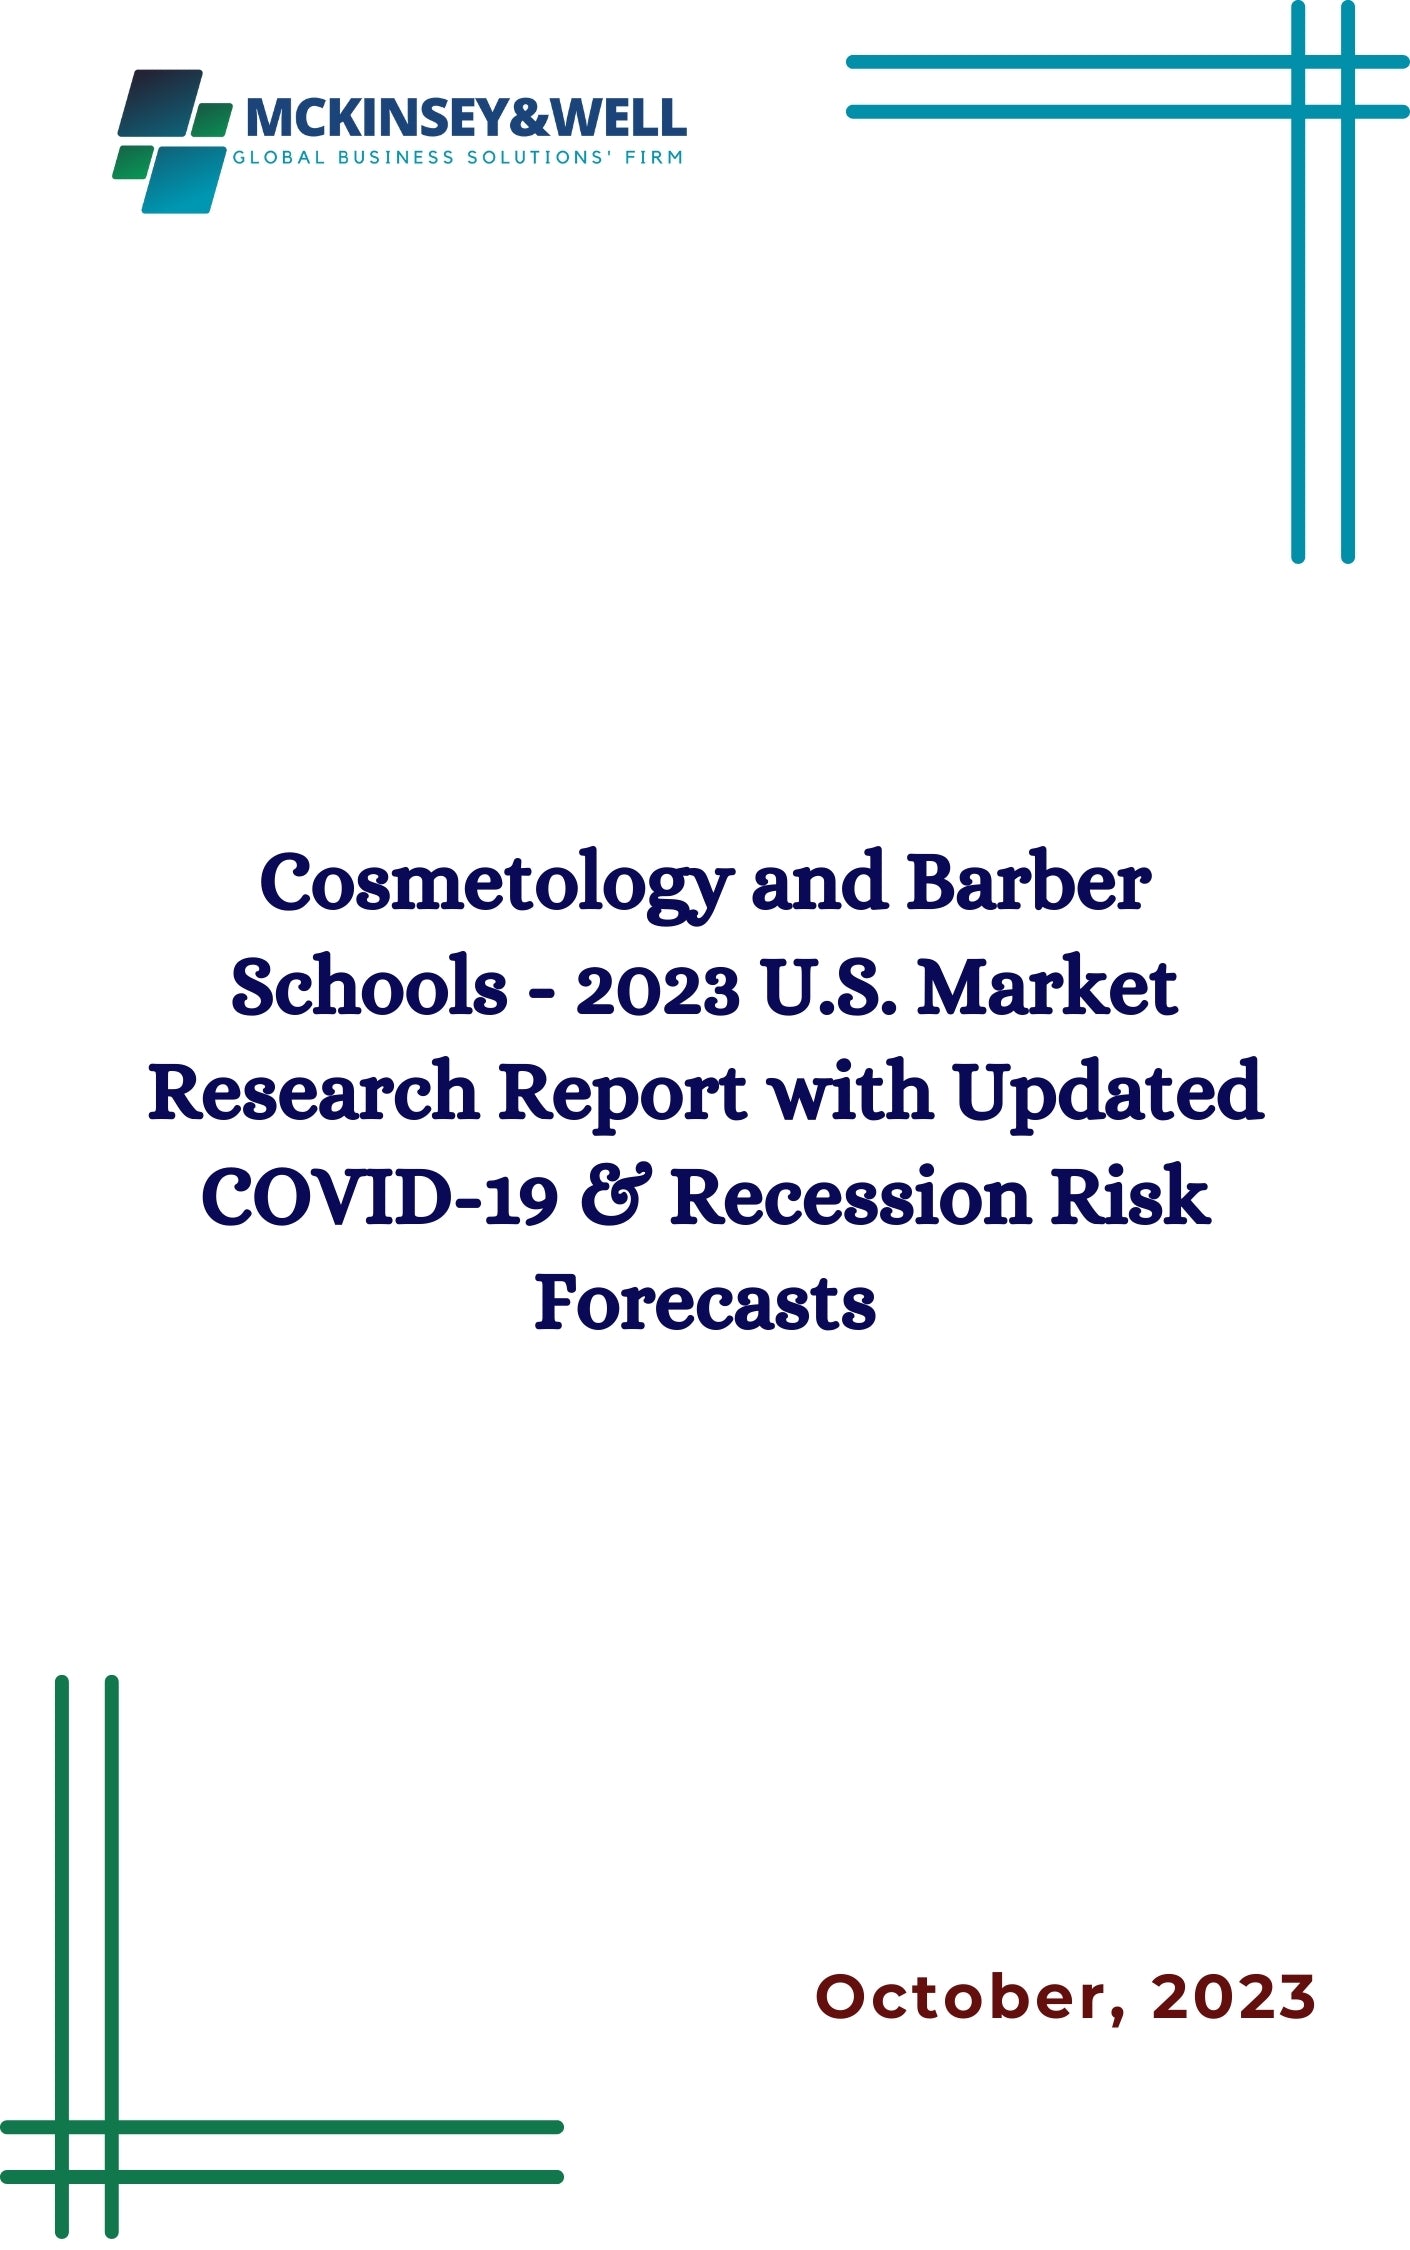 Cosmetology and Barber Schools - 2023 U.S. Market Research Report with Updated COVID-19 & Recession Risk Forecasts